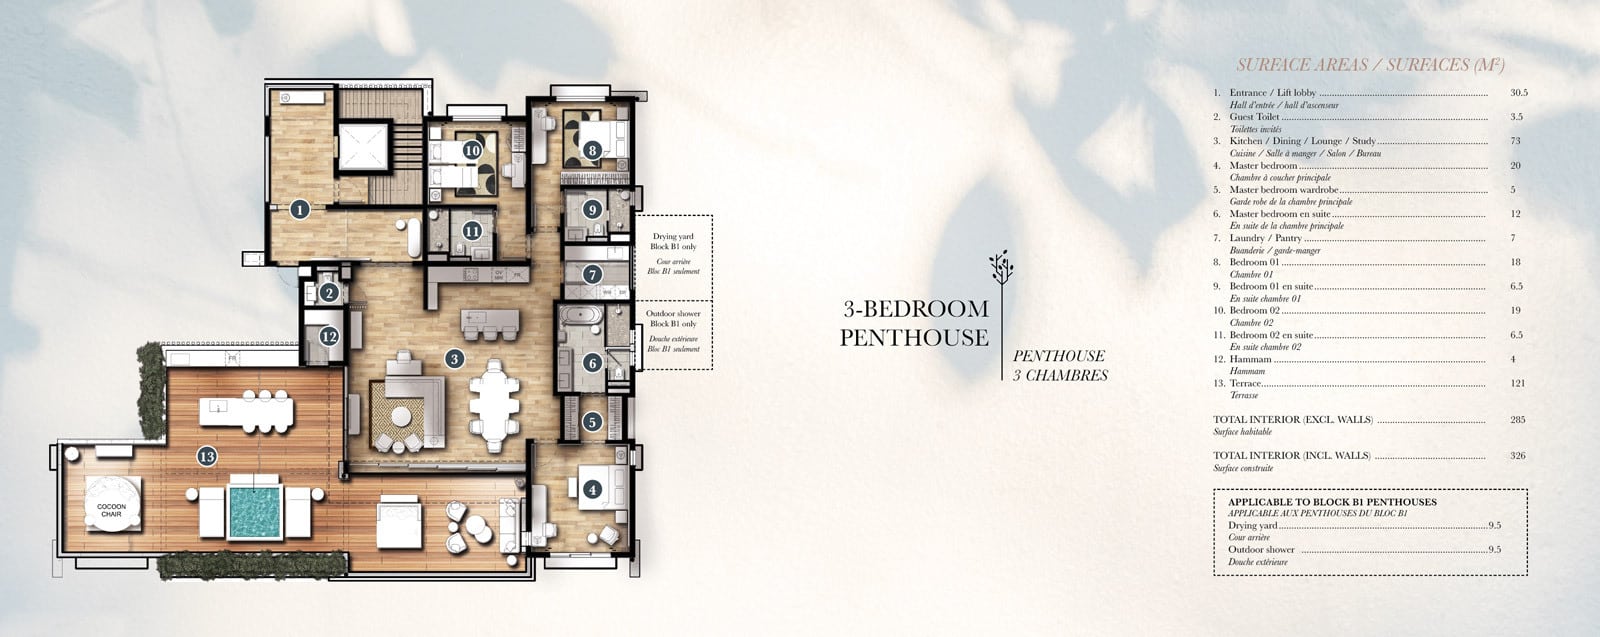 2futures infinity by the sea floor plan penthouse